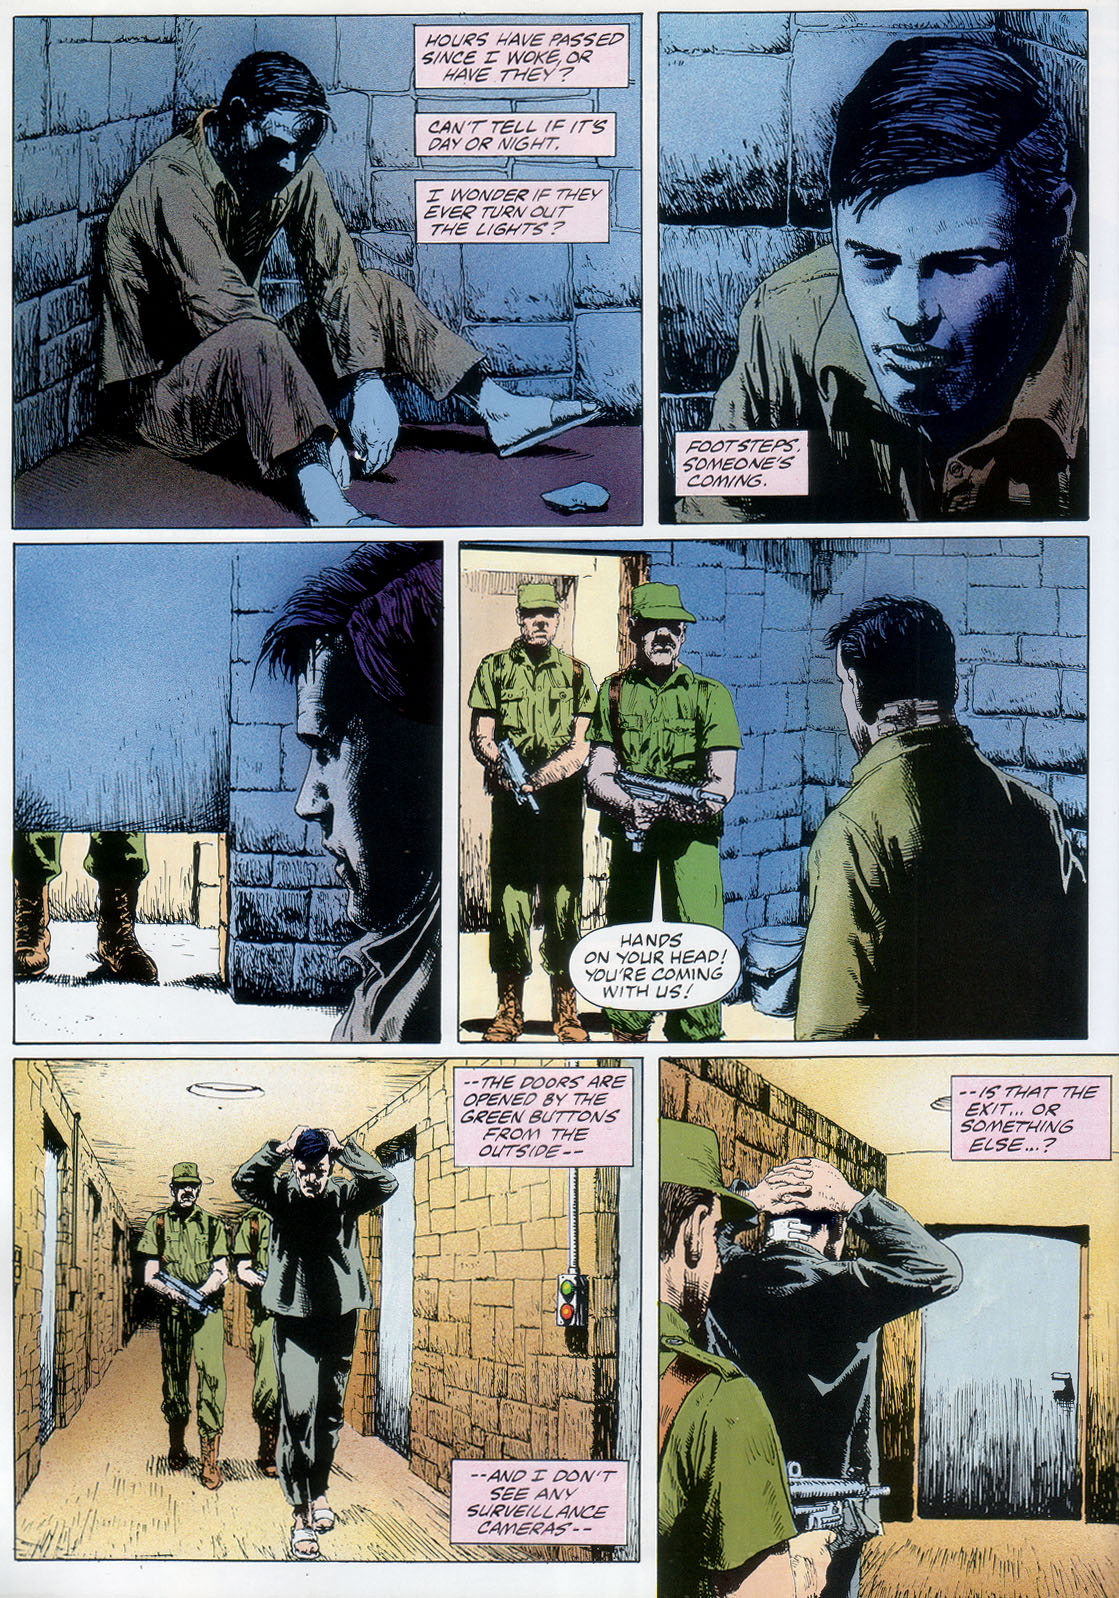 Marvel Graphic Novel issue 57 - Rick Mason - The Agent - Page 58